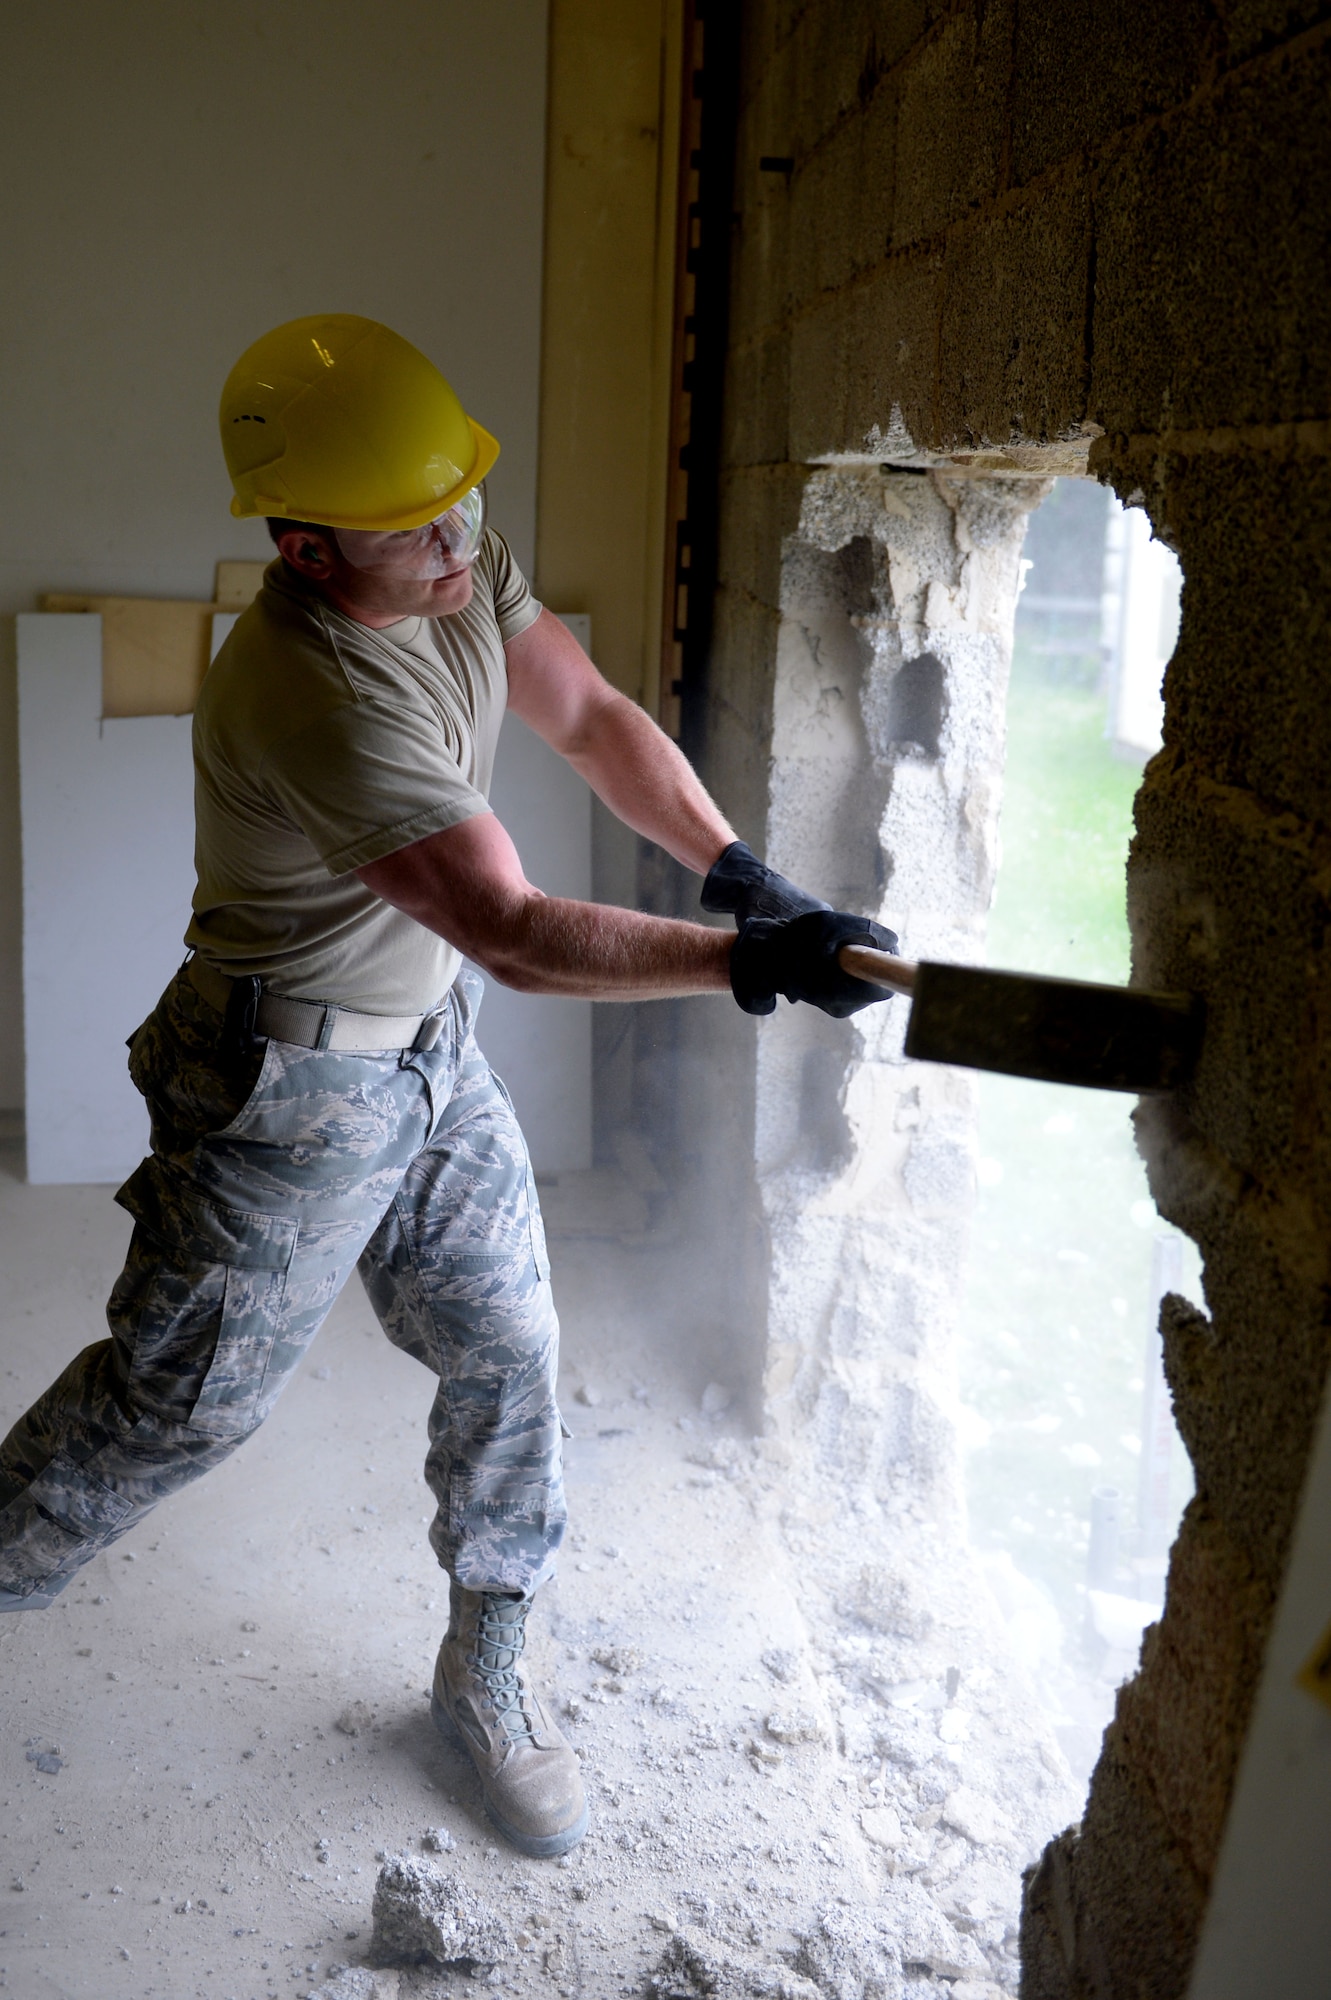 U.S. Air Force Senior Airman Richard Adamson, 52nd Civil Engineer Squadron structures journeyman from Linton, Ind., uses a sledge hammer to create an opening for a doorway in the Skelton Memorial Fitness Center racquet ball courts at Spangdahlem Air Base, Germany, June 3, 2014. The project is part of the remodel of the new combat fitness center which is scheduled to be finished between four and six months. (U.S. Air Force photo by Senior Airman Alexis Siekert/Released)